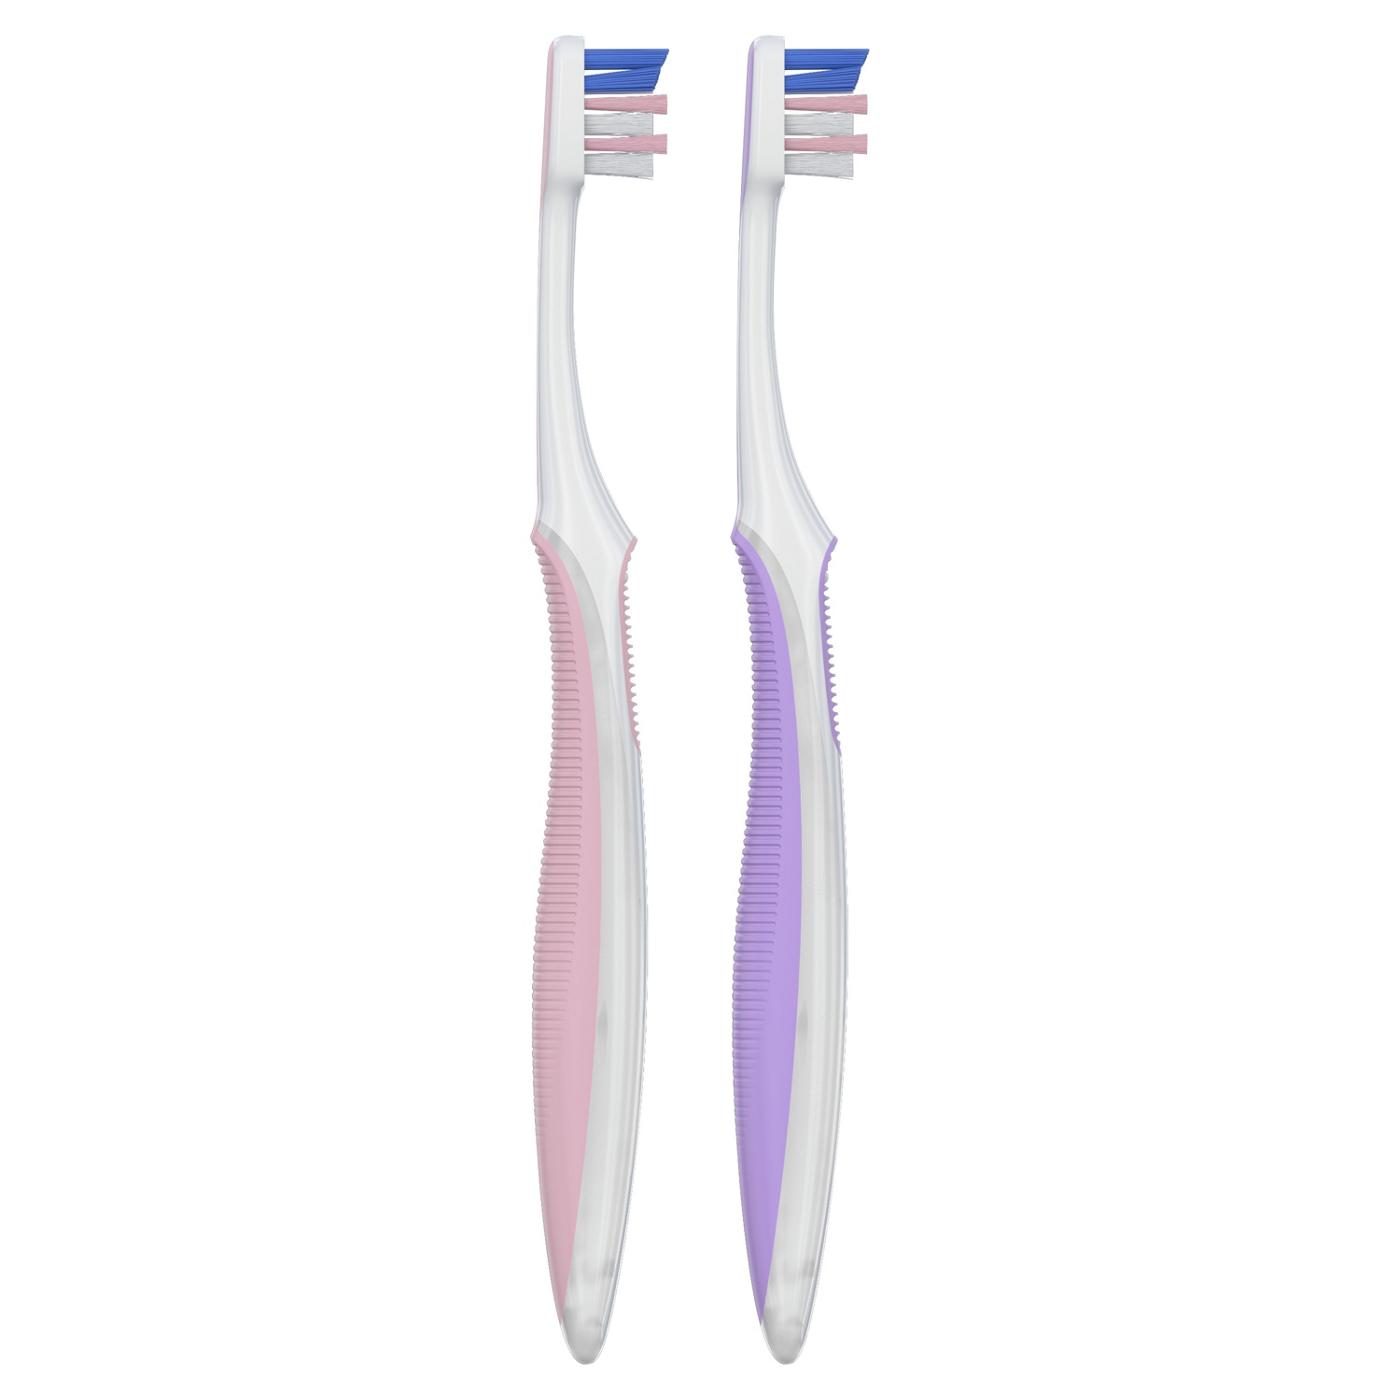 Oral-B Gum Care Compact Extra Soft Toothbrush; image 6 of 9